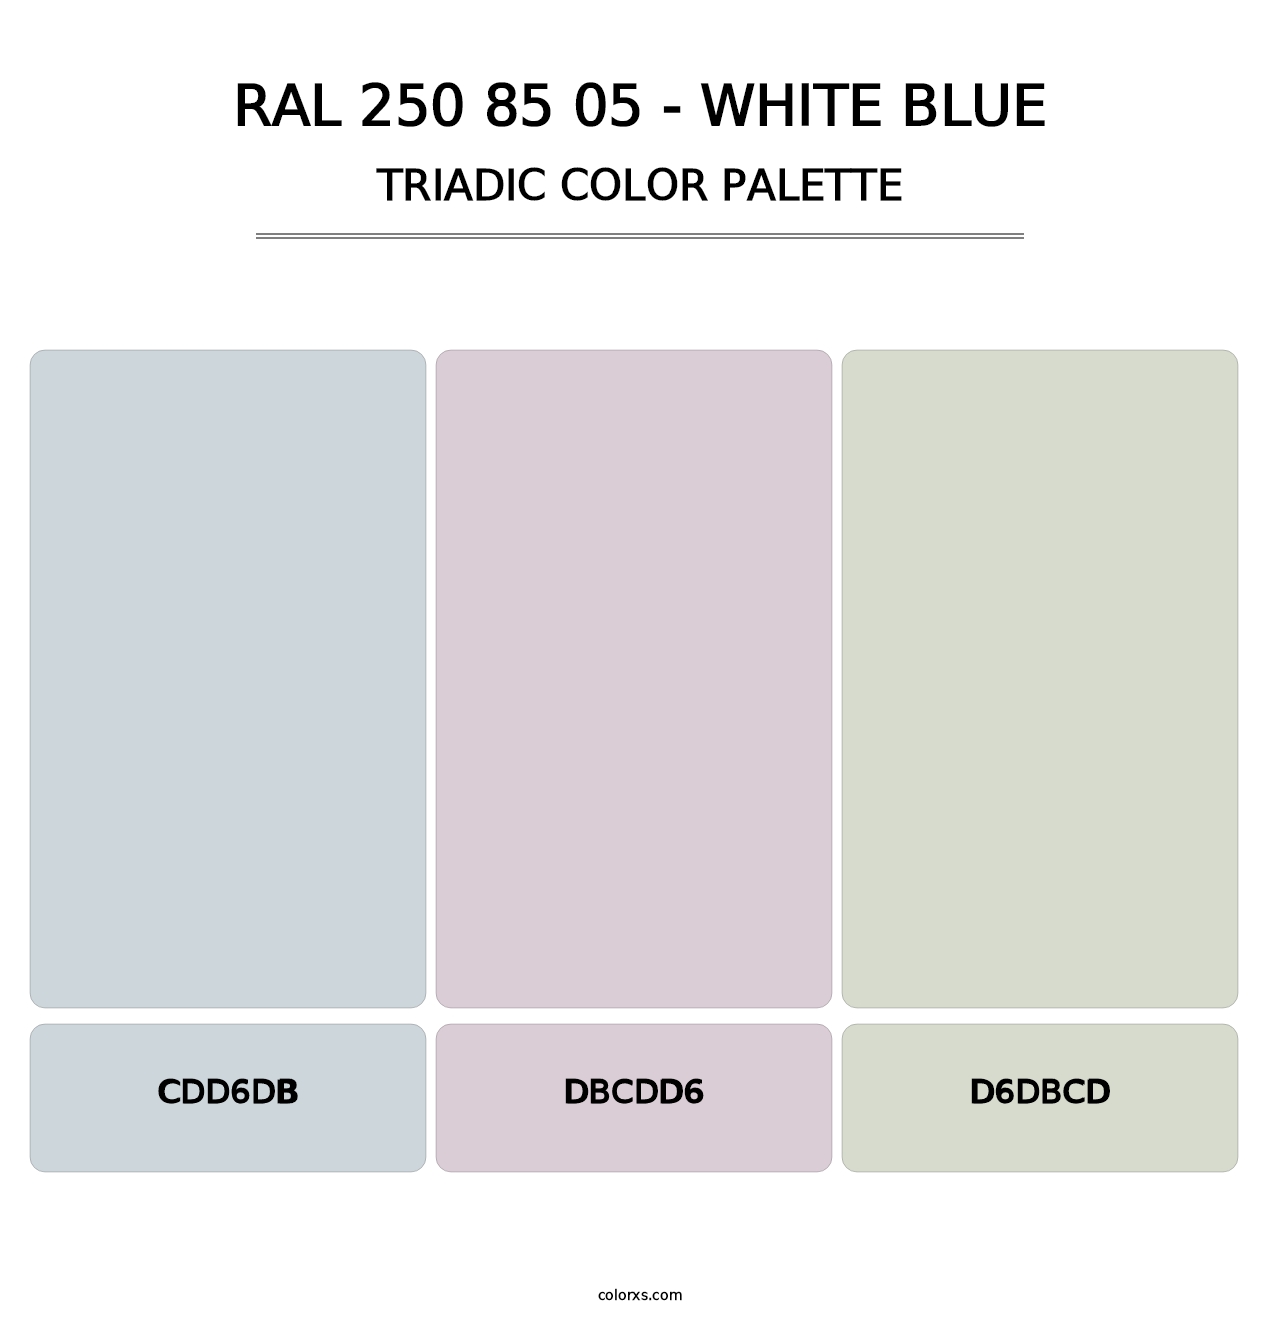 RAL 250 85 05 - White Blue - Triadic Color Palette